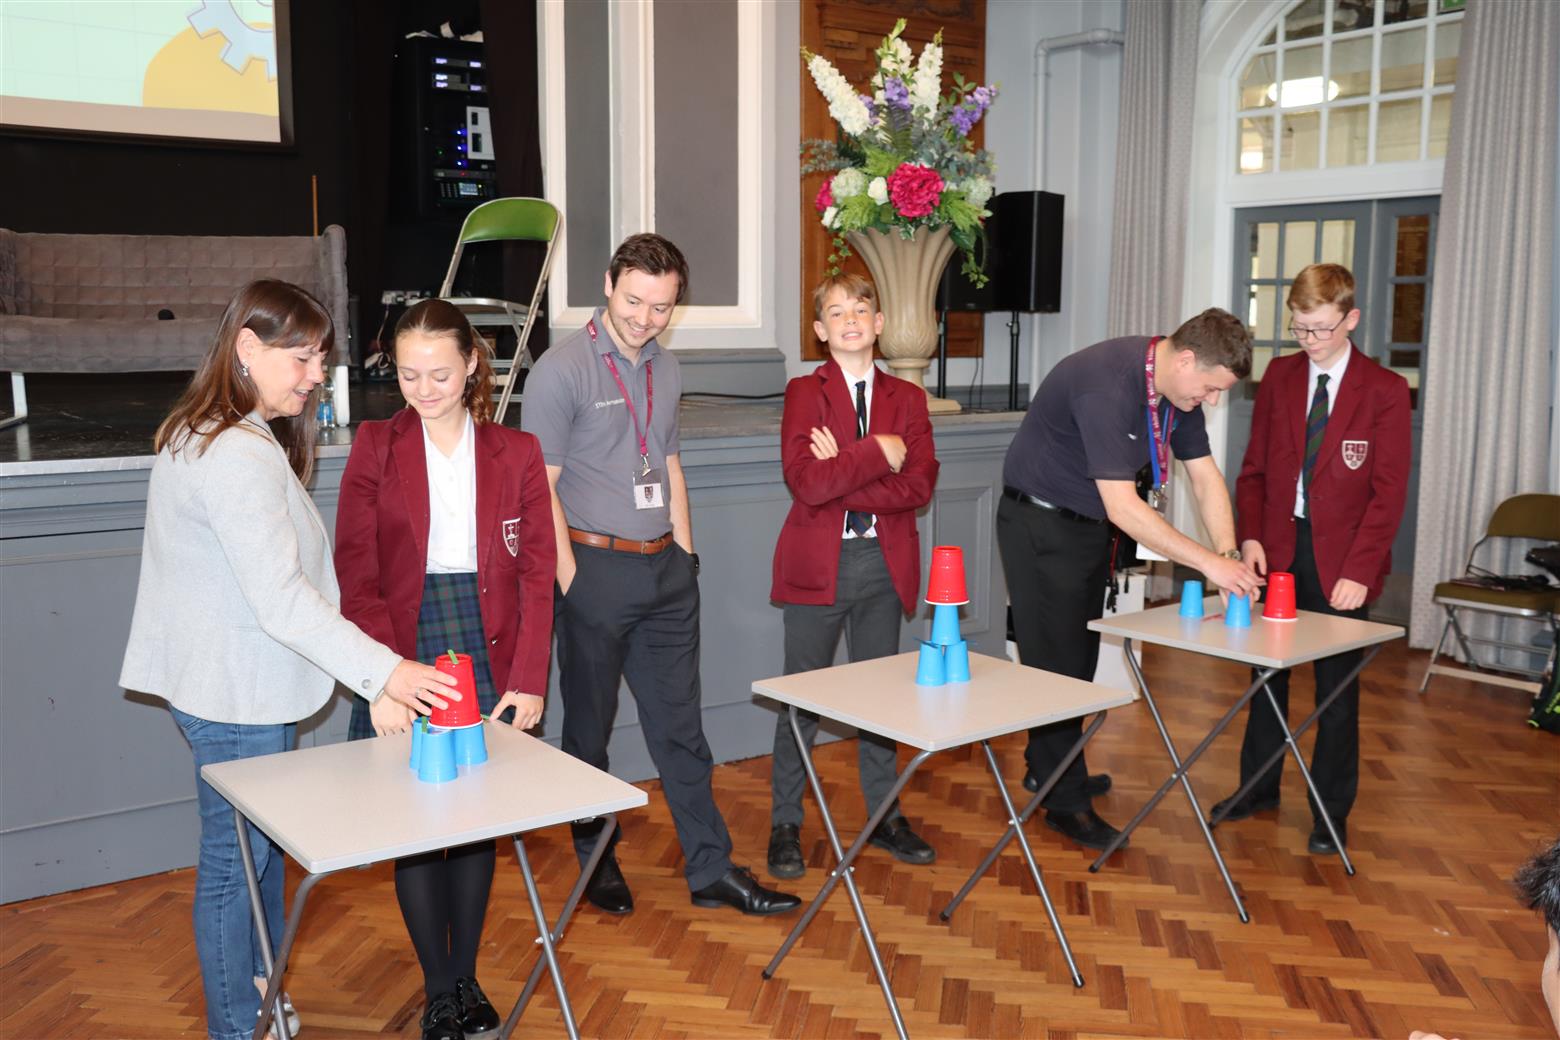 Year 8 meet STEM panel for "A Cuppa with STEM"